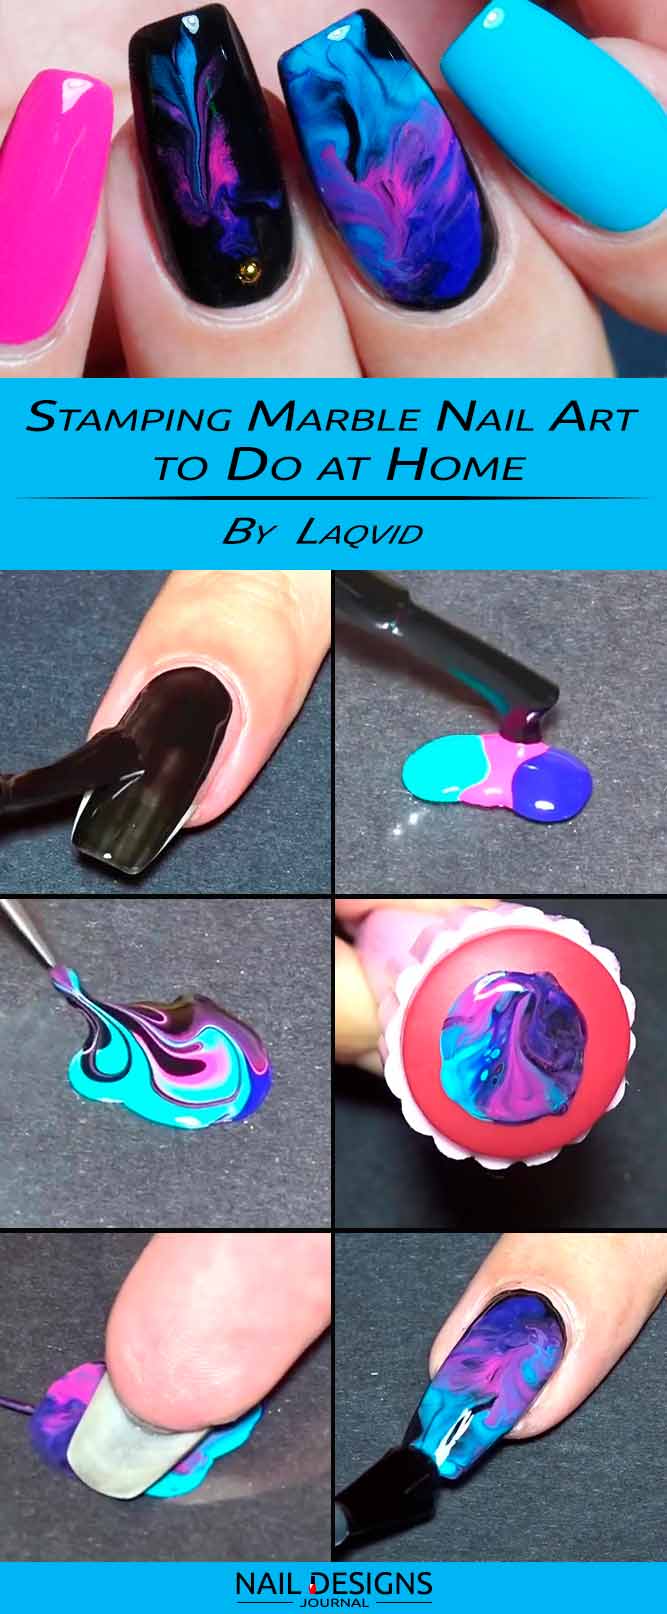 How To Do Nail Designs With Stamping Marble